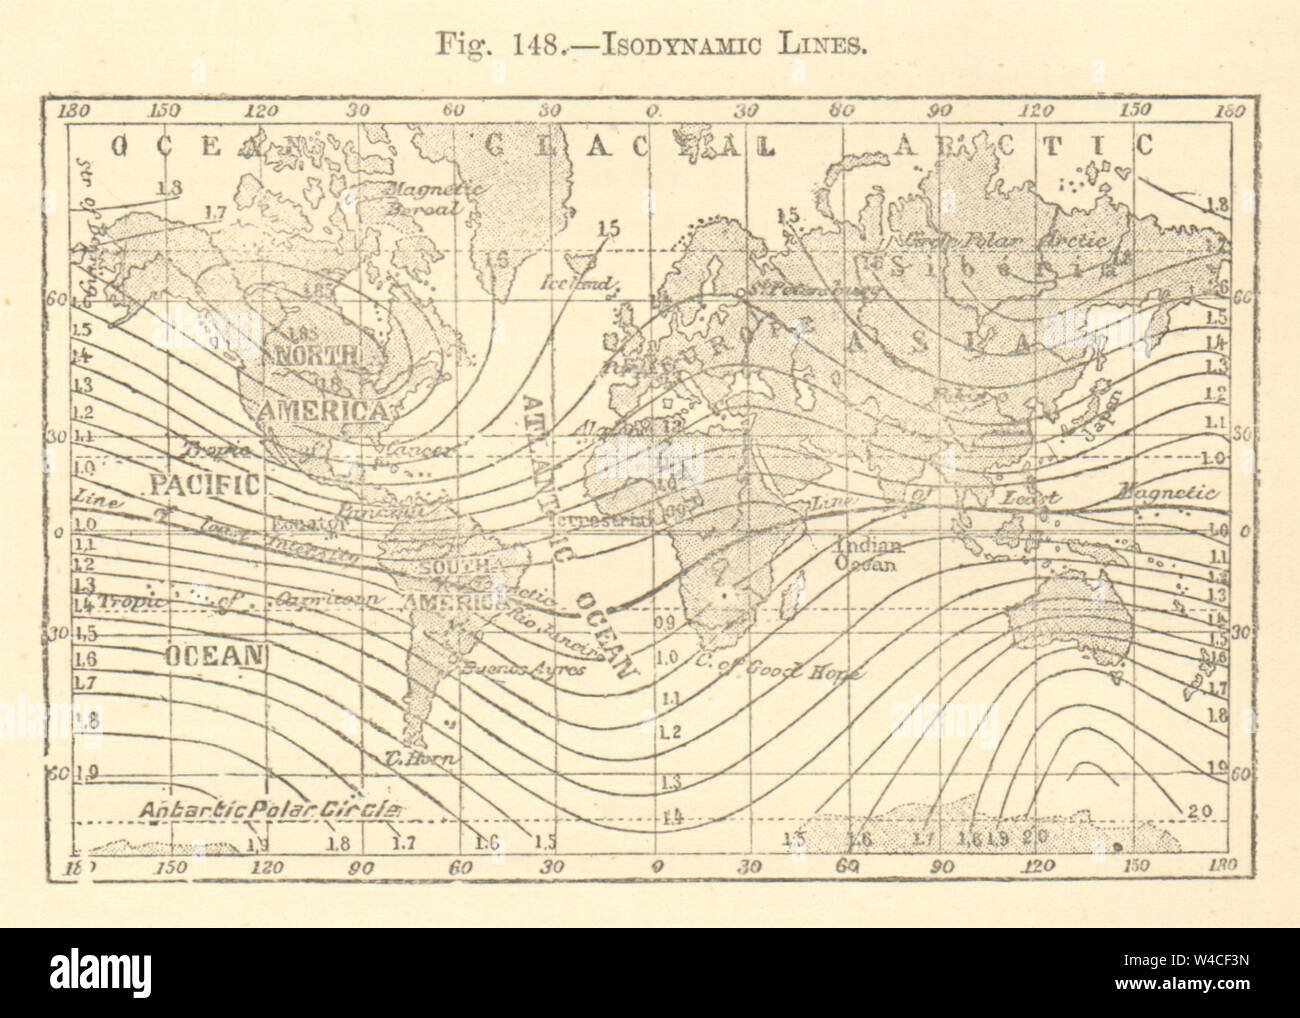 Isodynamic Lines. World. SMALL sketch map 1886 old antique plan chart Stock Photo